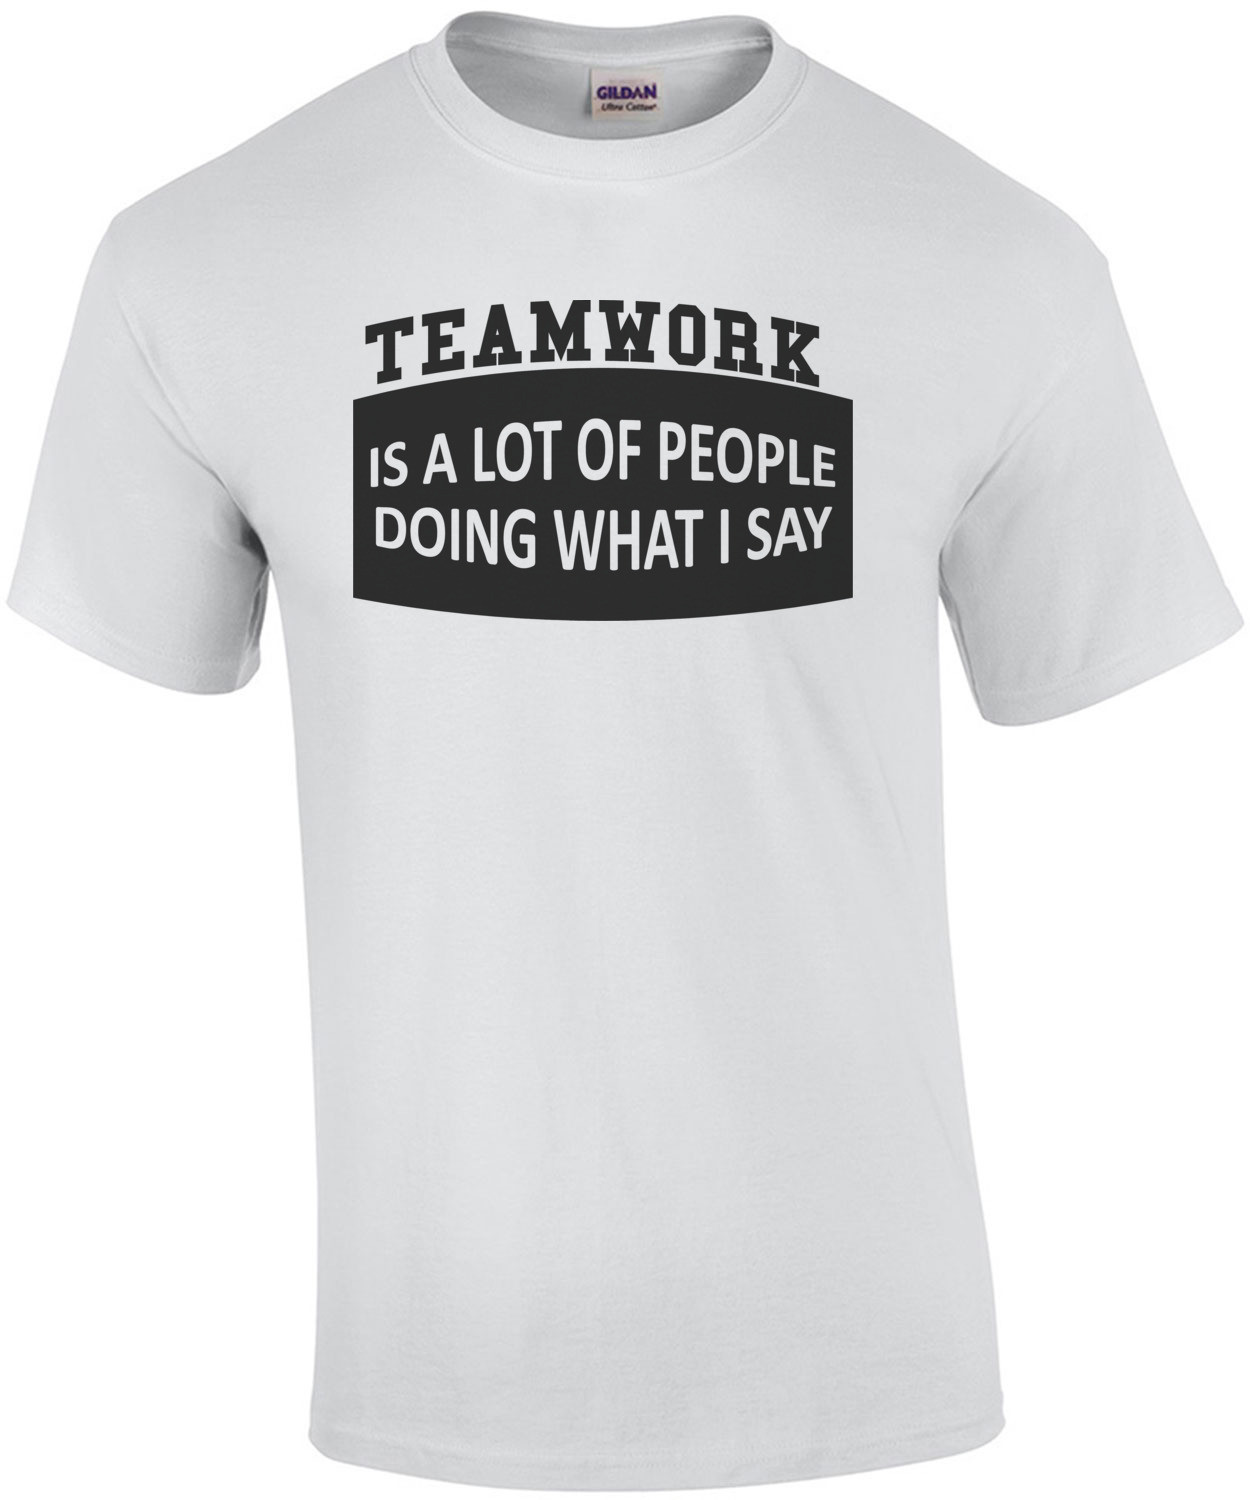 Teamwork Is a Lot Of People Doing What I Say shirt